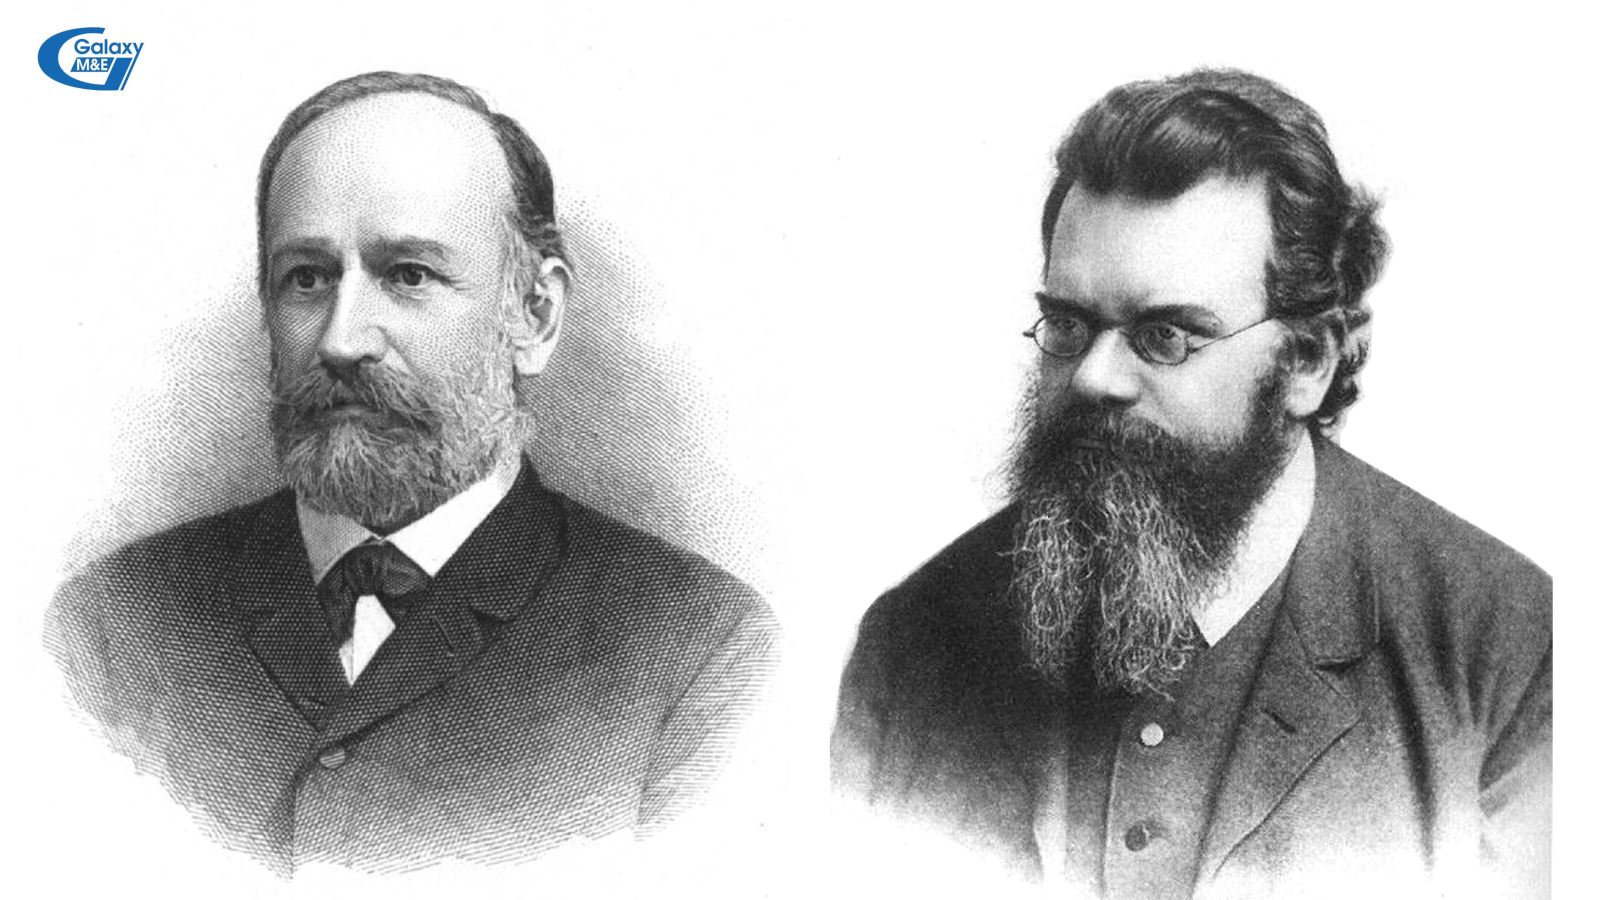 Physicist Josef Stefan (1835 - 1893) on the left and Ludwig Eduard Boltzmann (1844 - 1906) on the right.